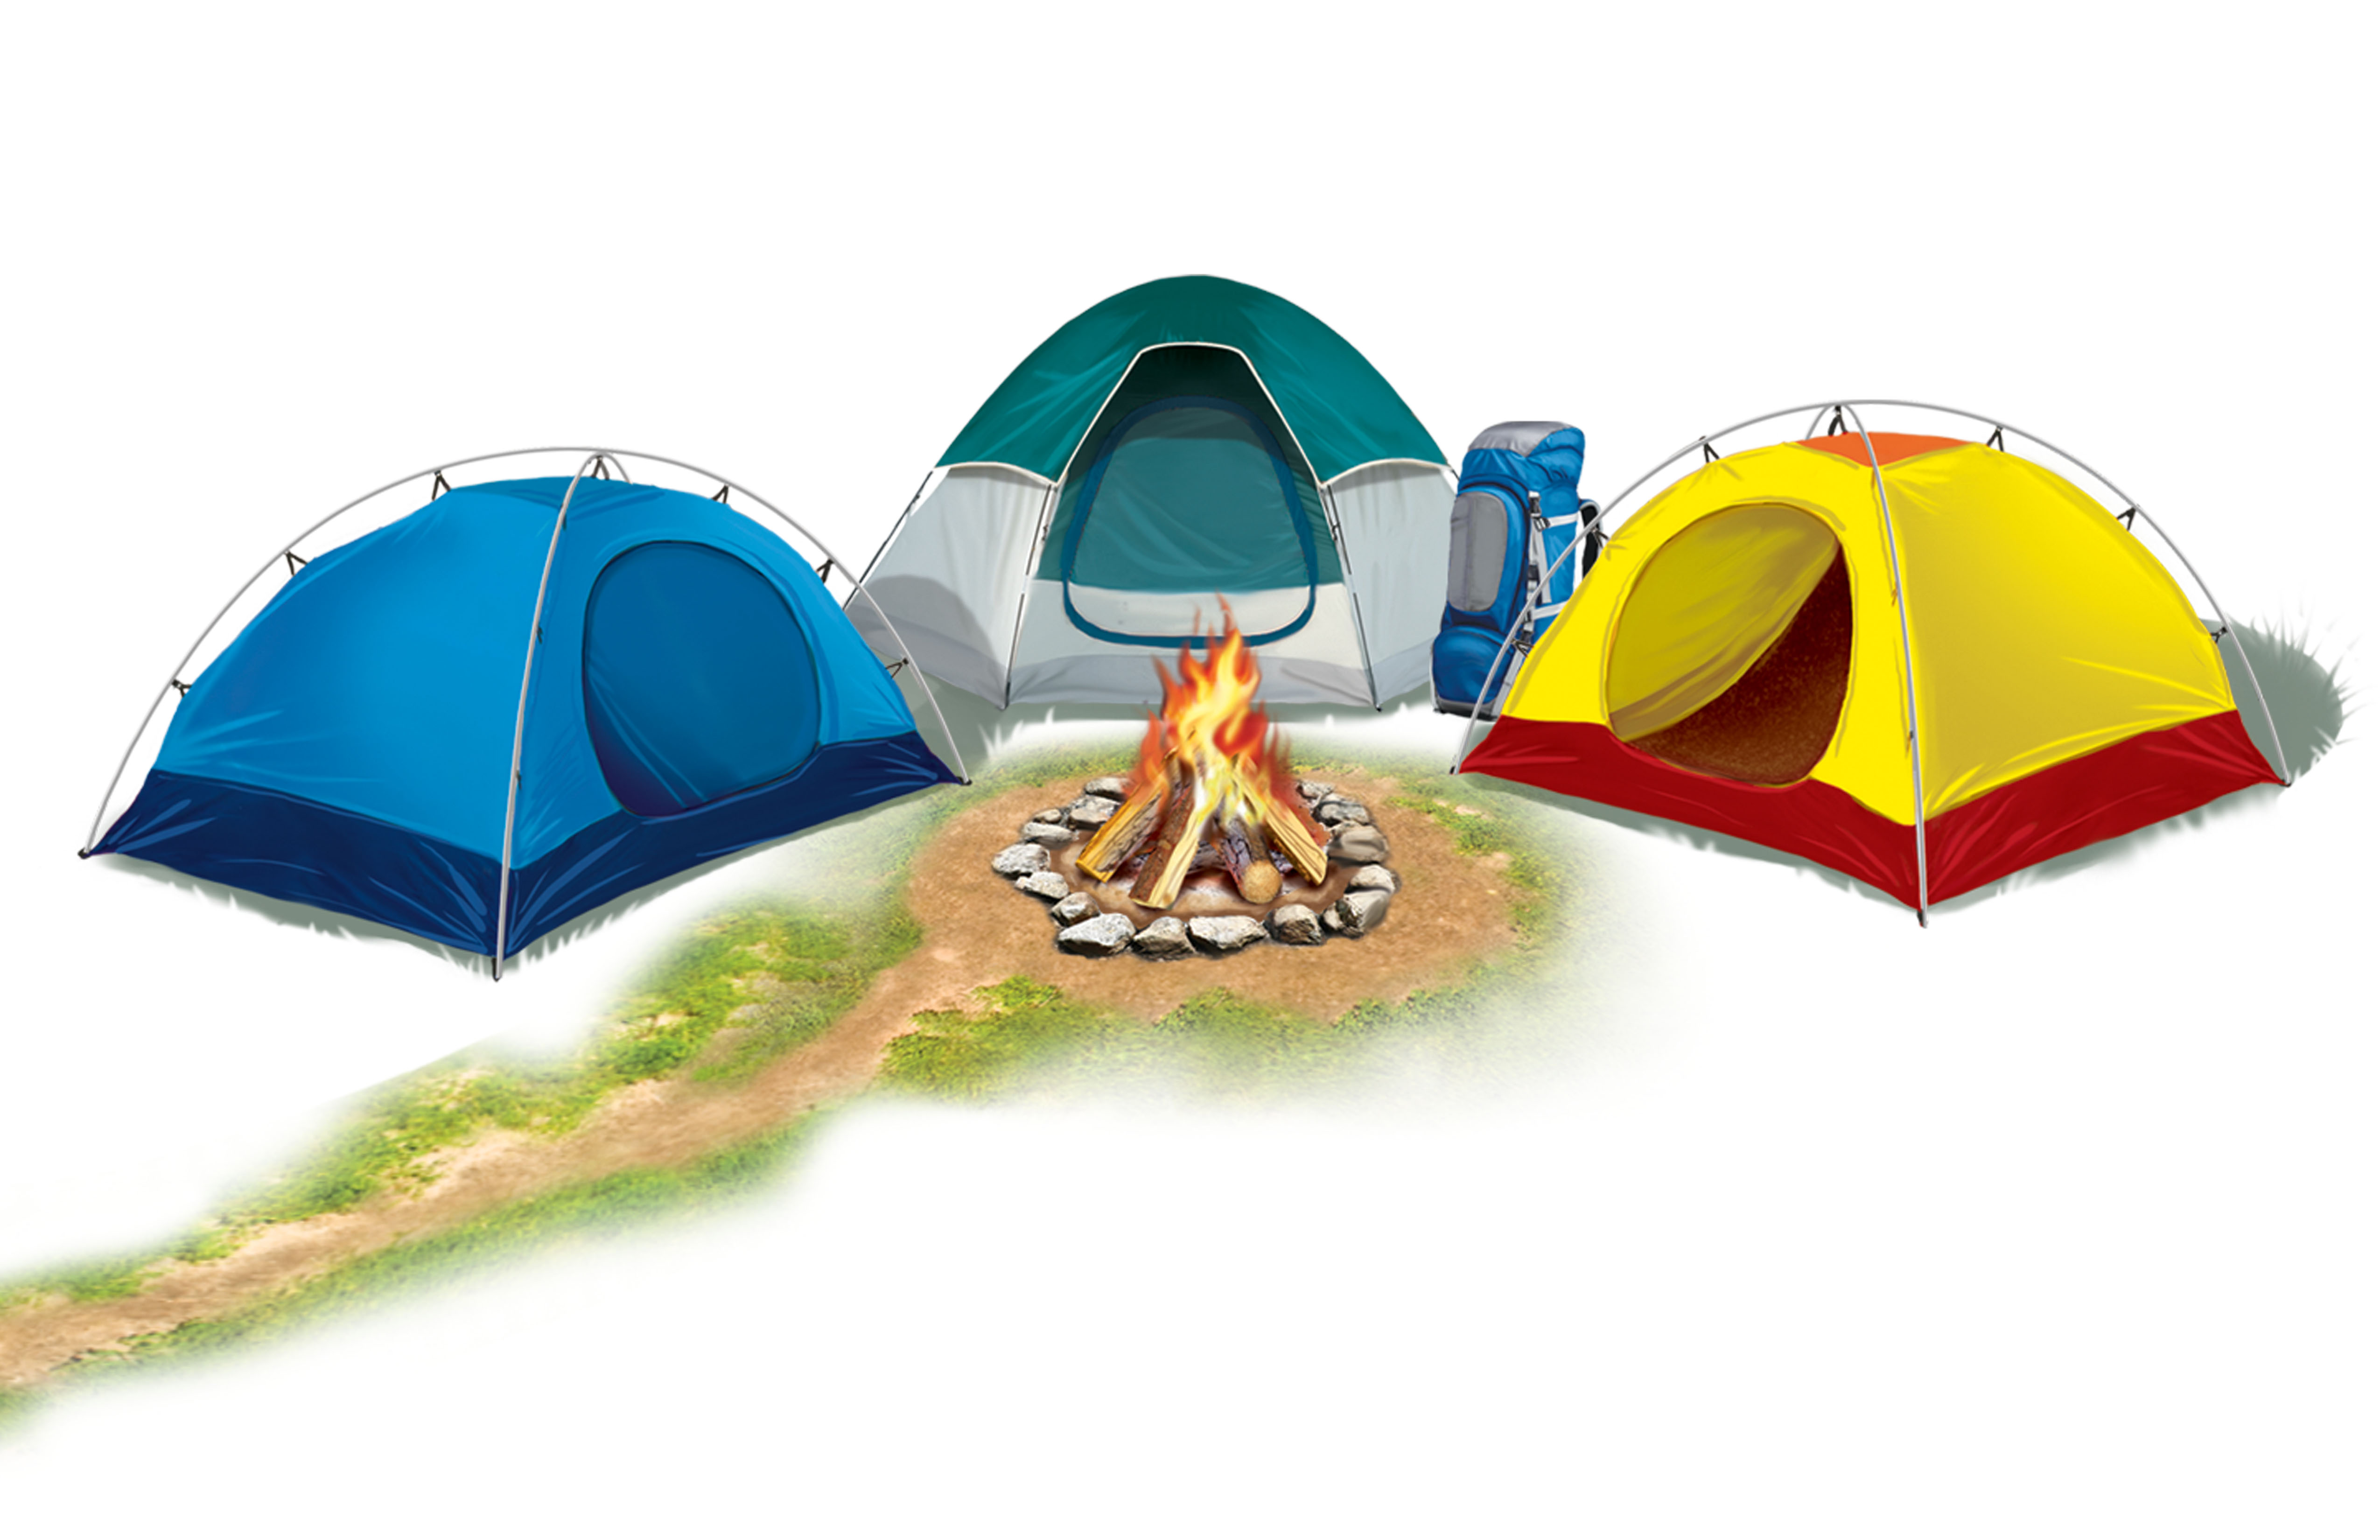 Clip Arts Related To : tent camping clipart. 